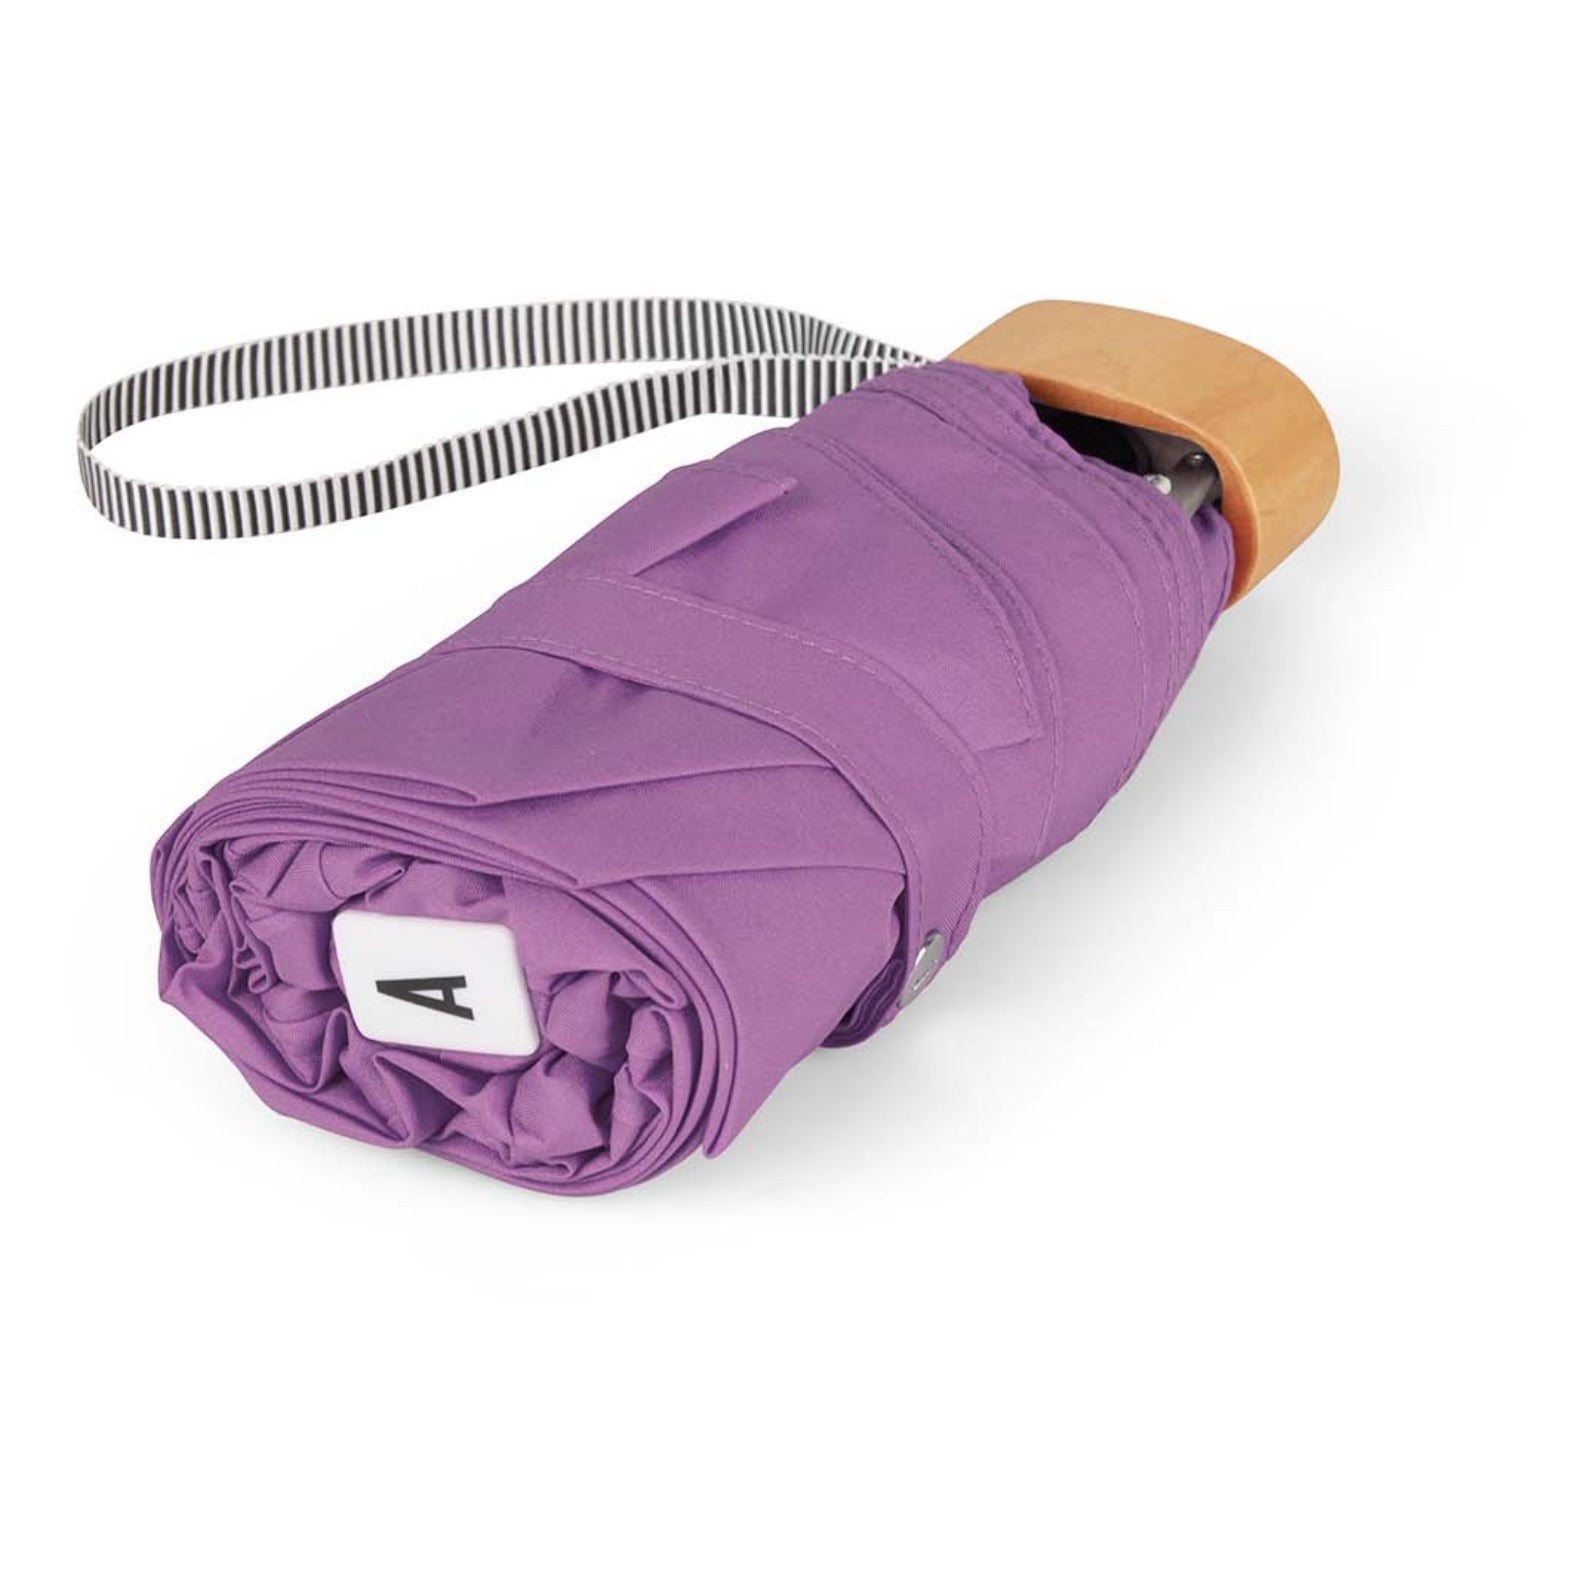 Anatole Olympe Collapsible Micro Umbrella with wooden handle - lilac 